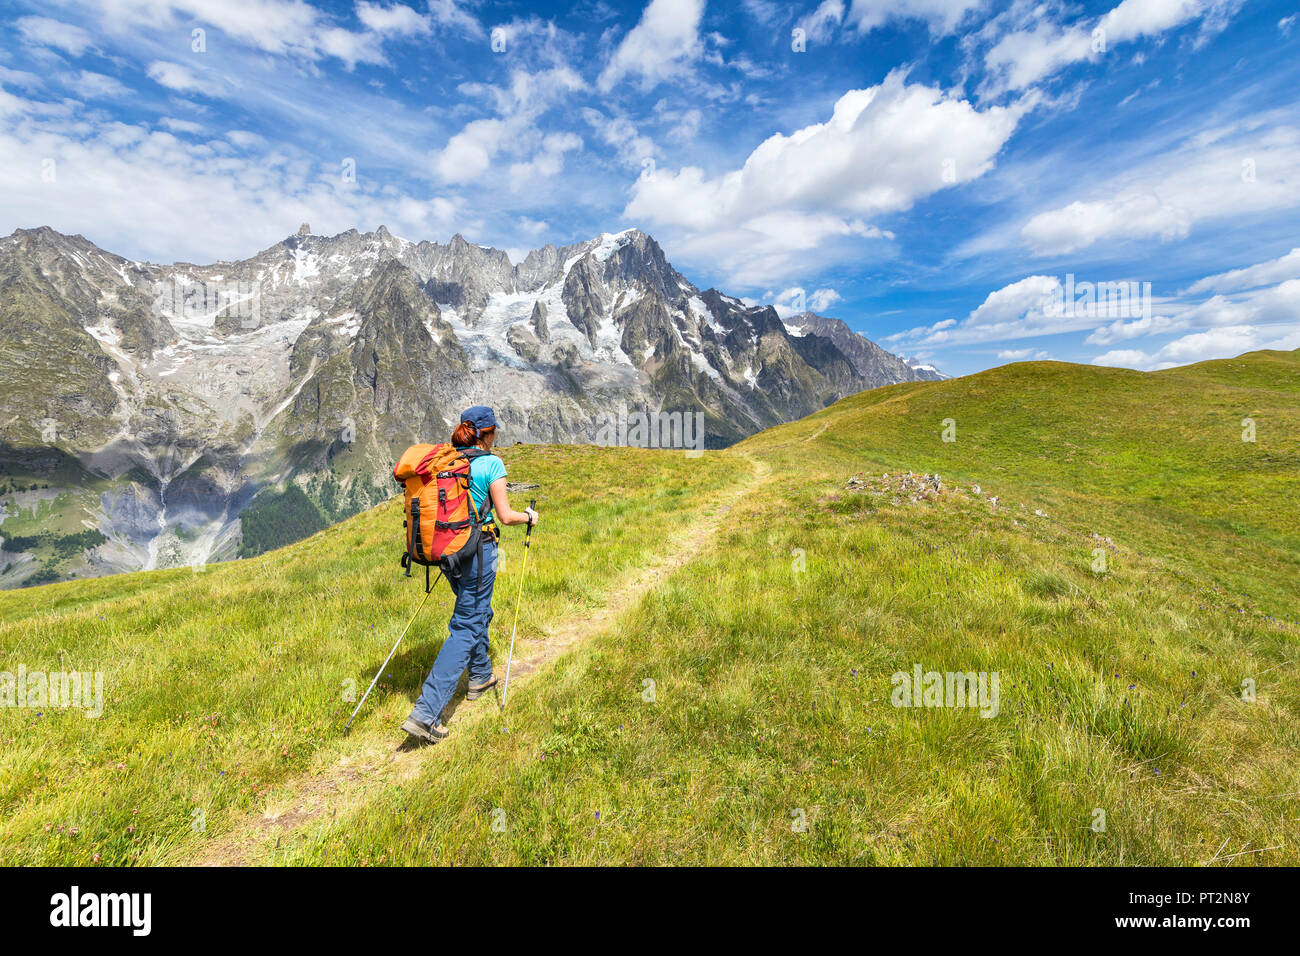 A trekker is walking on the Mont de la Saxe in front of Grandes Jorasses during during the Mont Blanc hiking tours (Ferret Valley, Courmayeur, Aosta province, Aosta Valley, Italy, Europe) Stock Photo